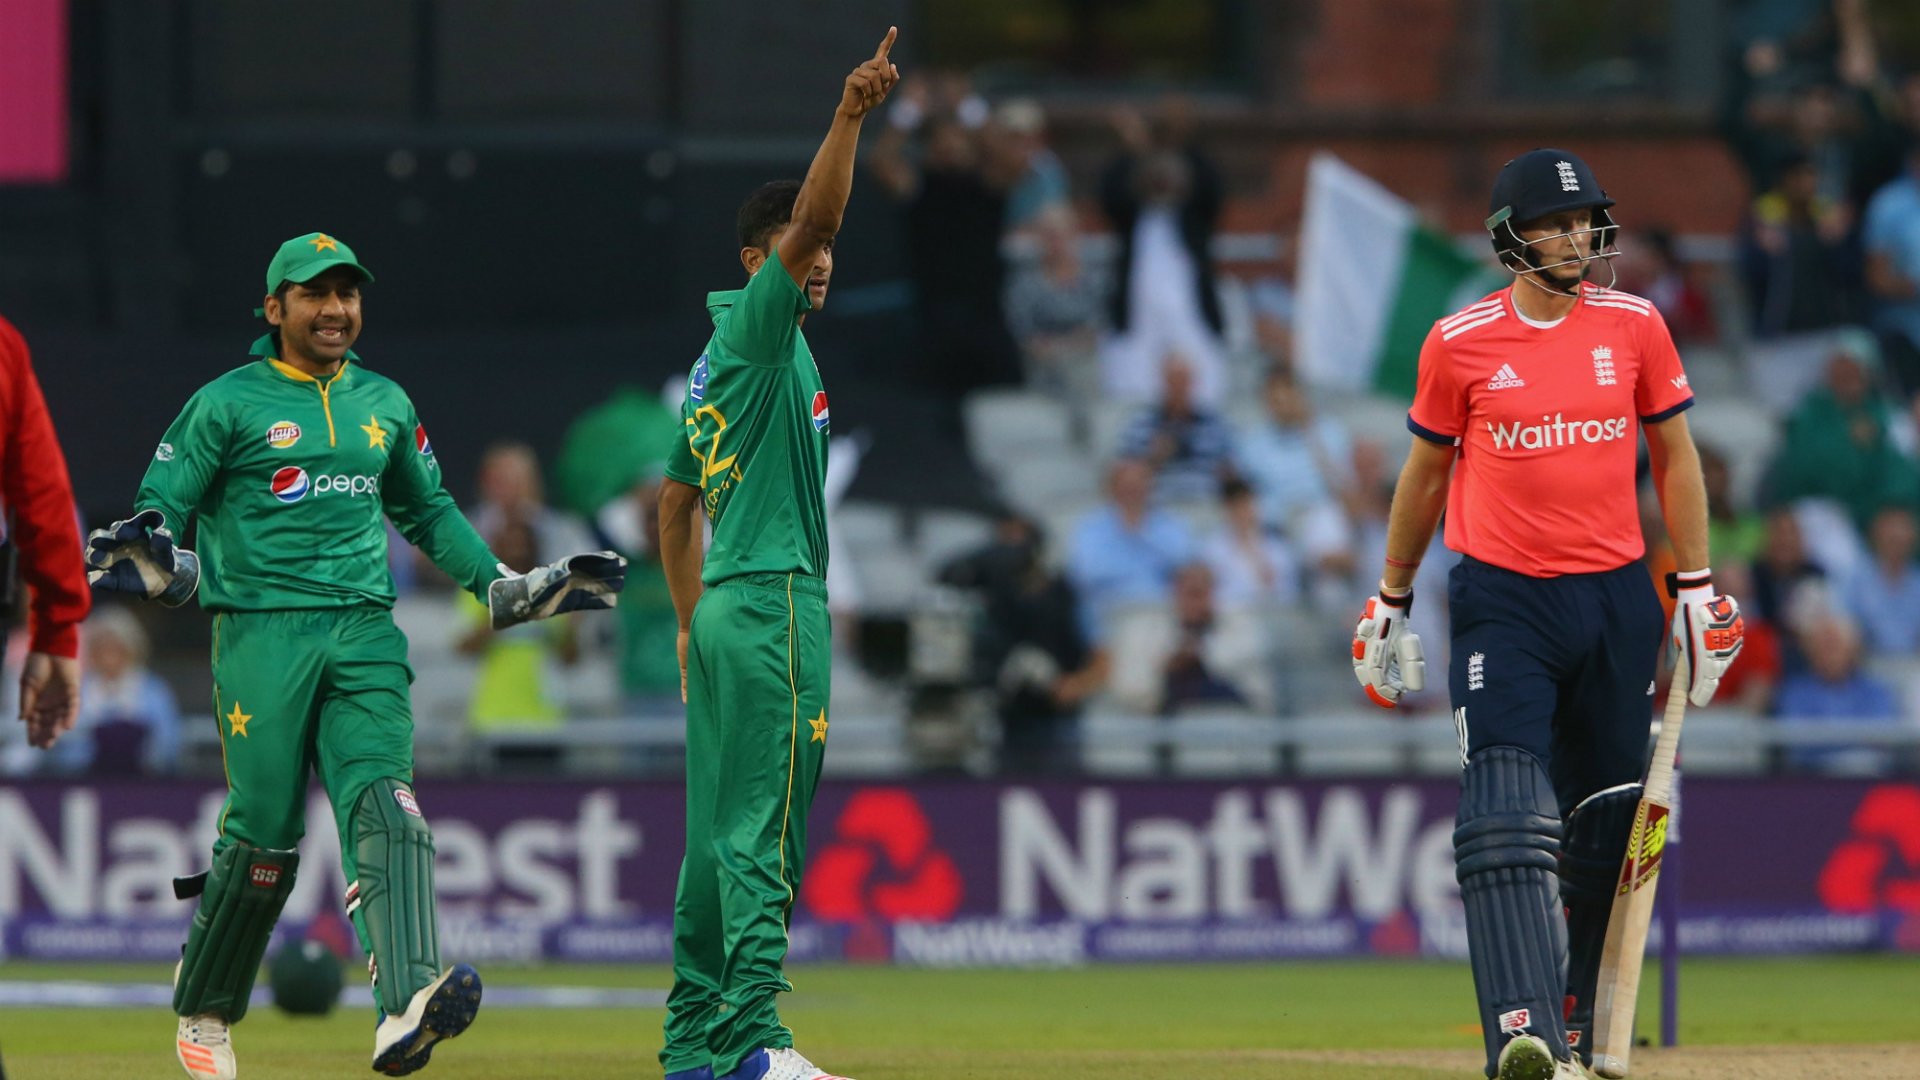 England vs Pakistan live stream How to watch the T20I series cricket online from anywhere Android Central